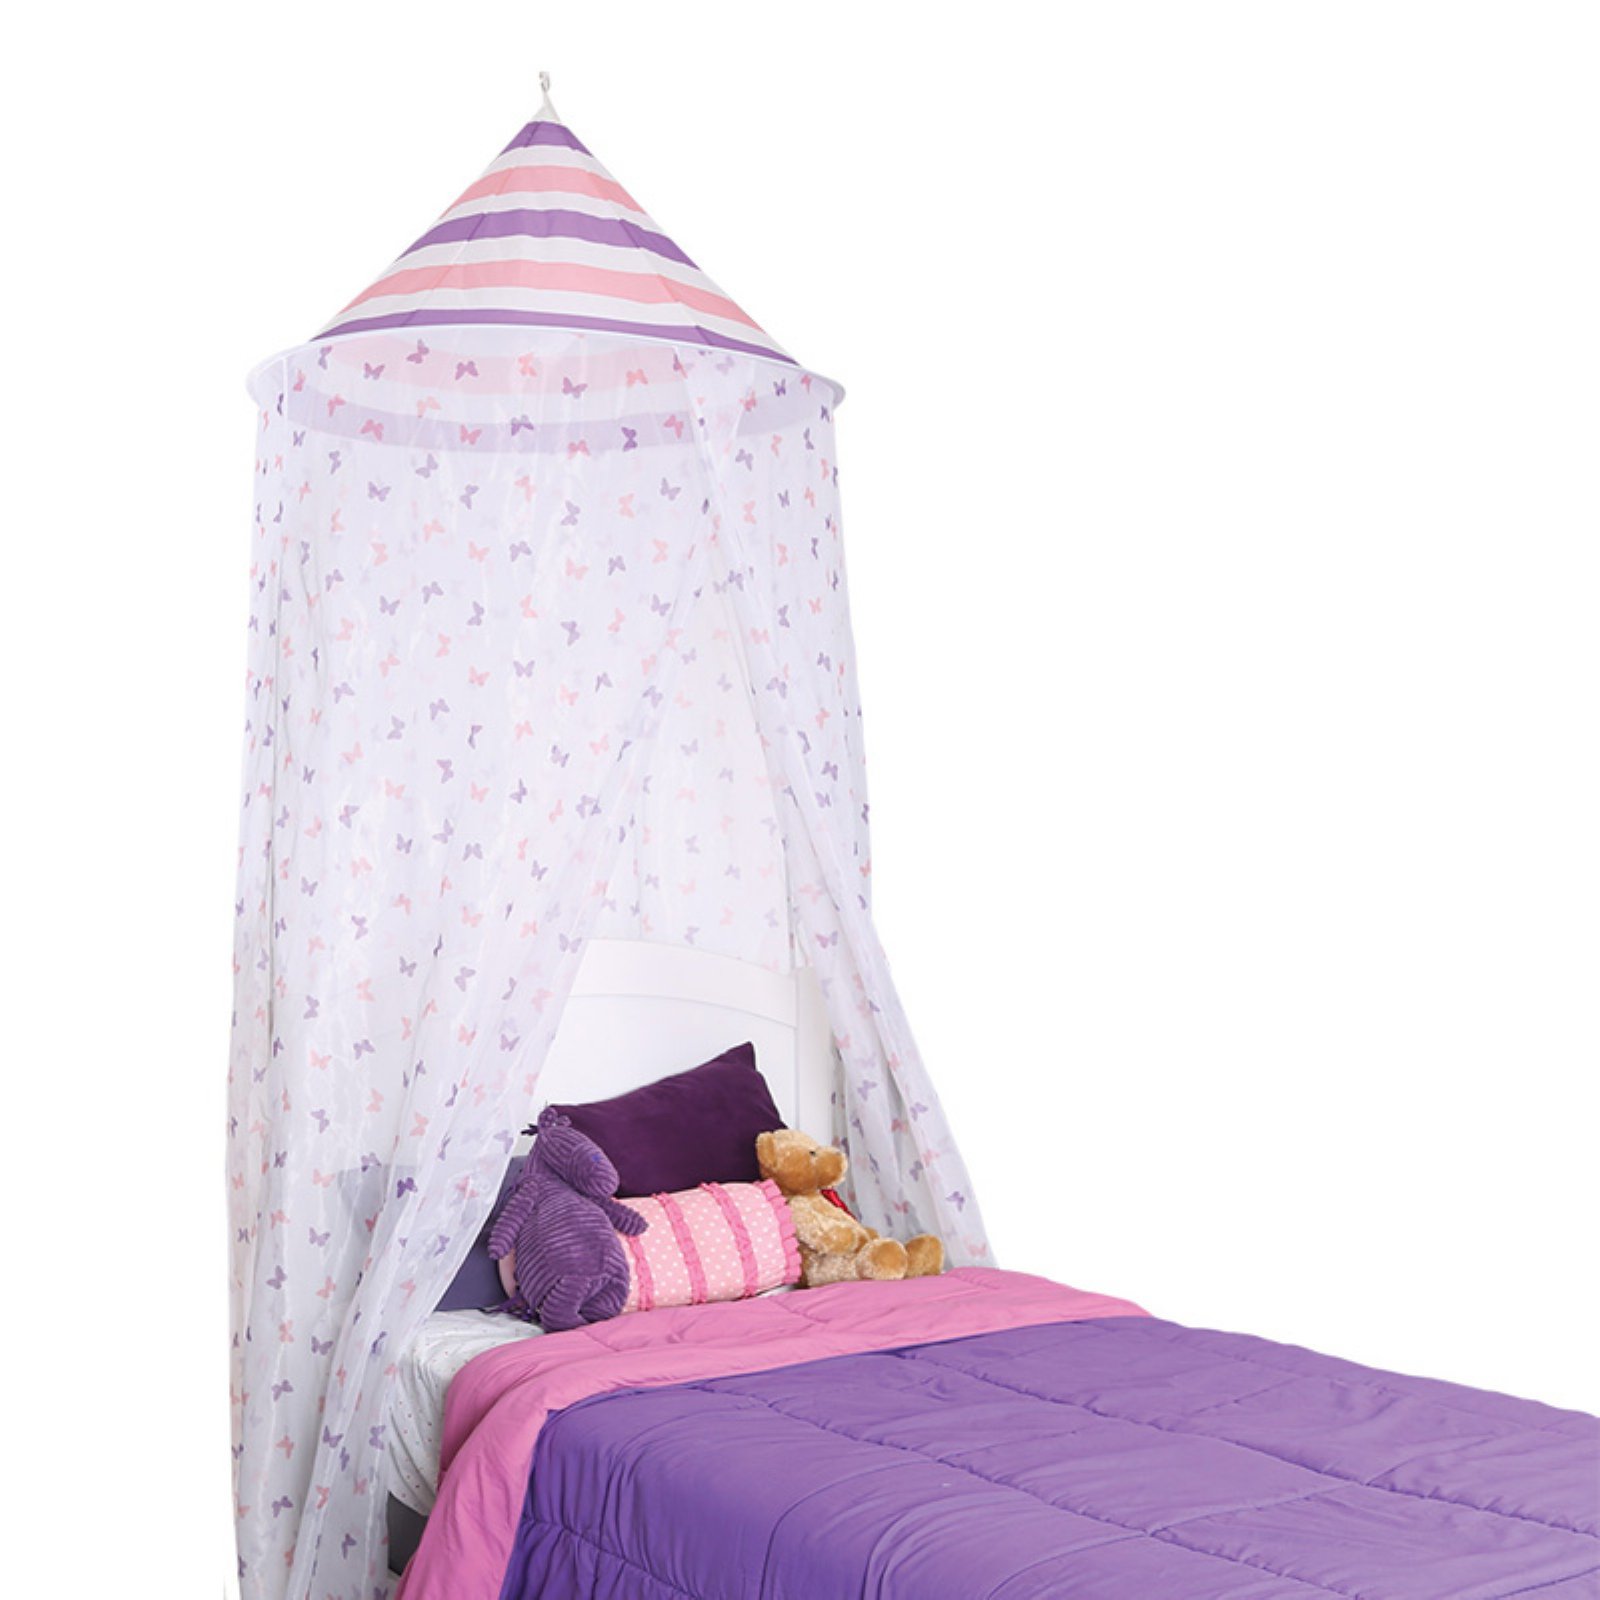 Pacific Play Tents 68100 Kids Butterflies Hanging Bed and Play Canopy - 37" x 80" - image 1 of 6